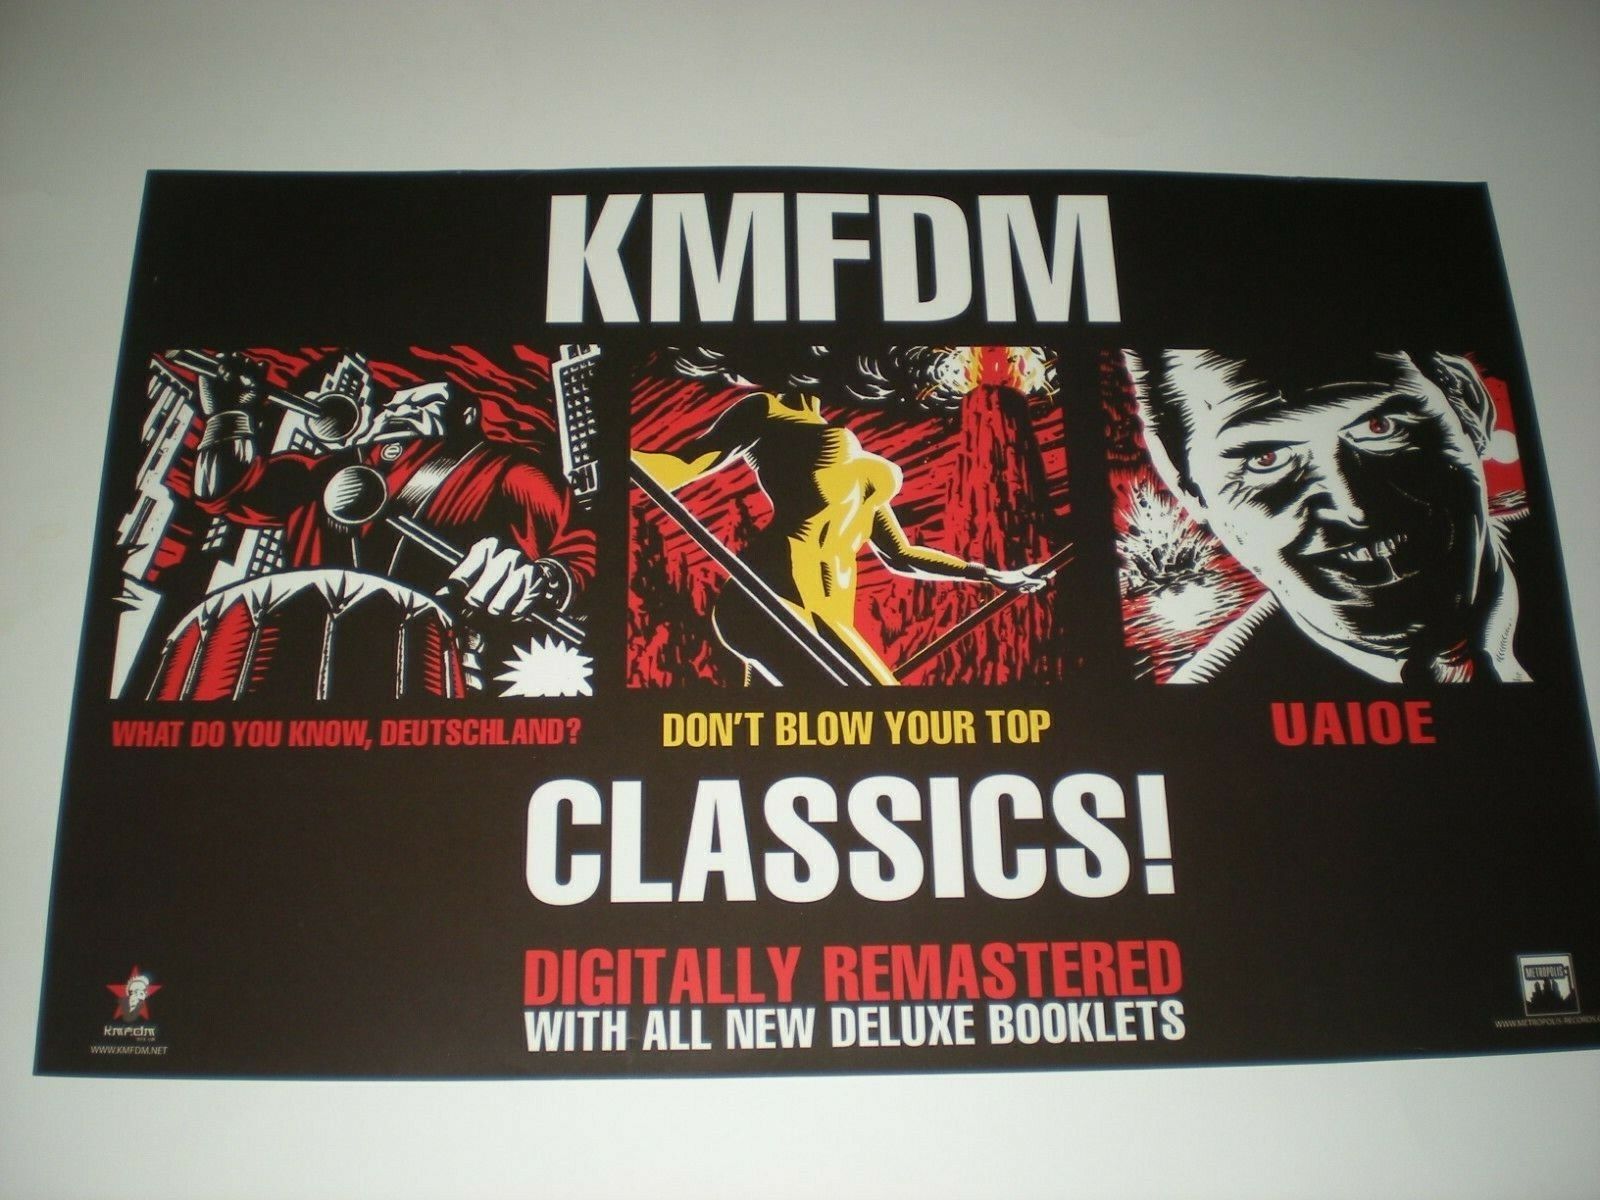 POSTER by KMFDM classics Promo uaioe DONT BLOW YOUR TOP For the bands album #